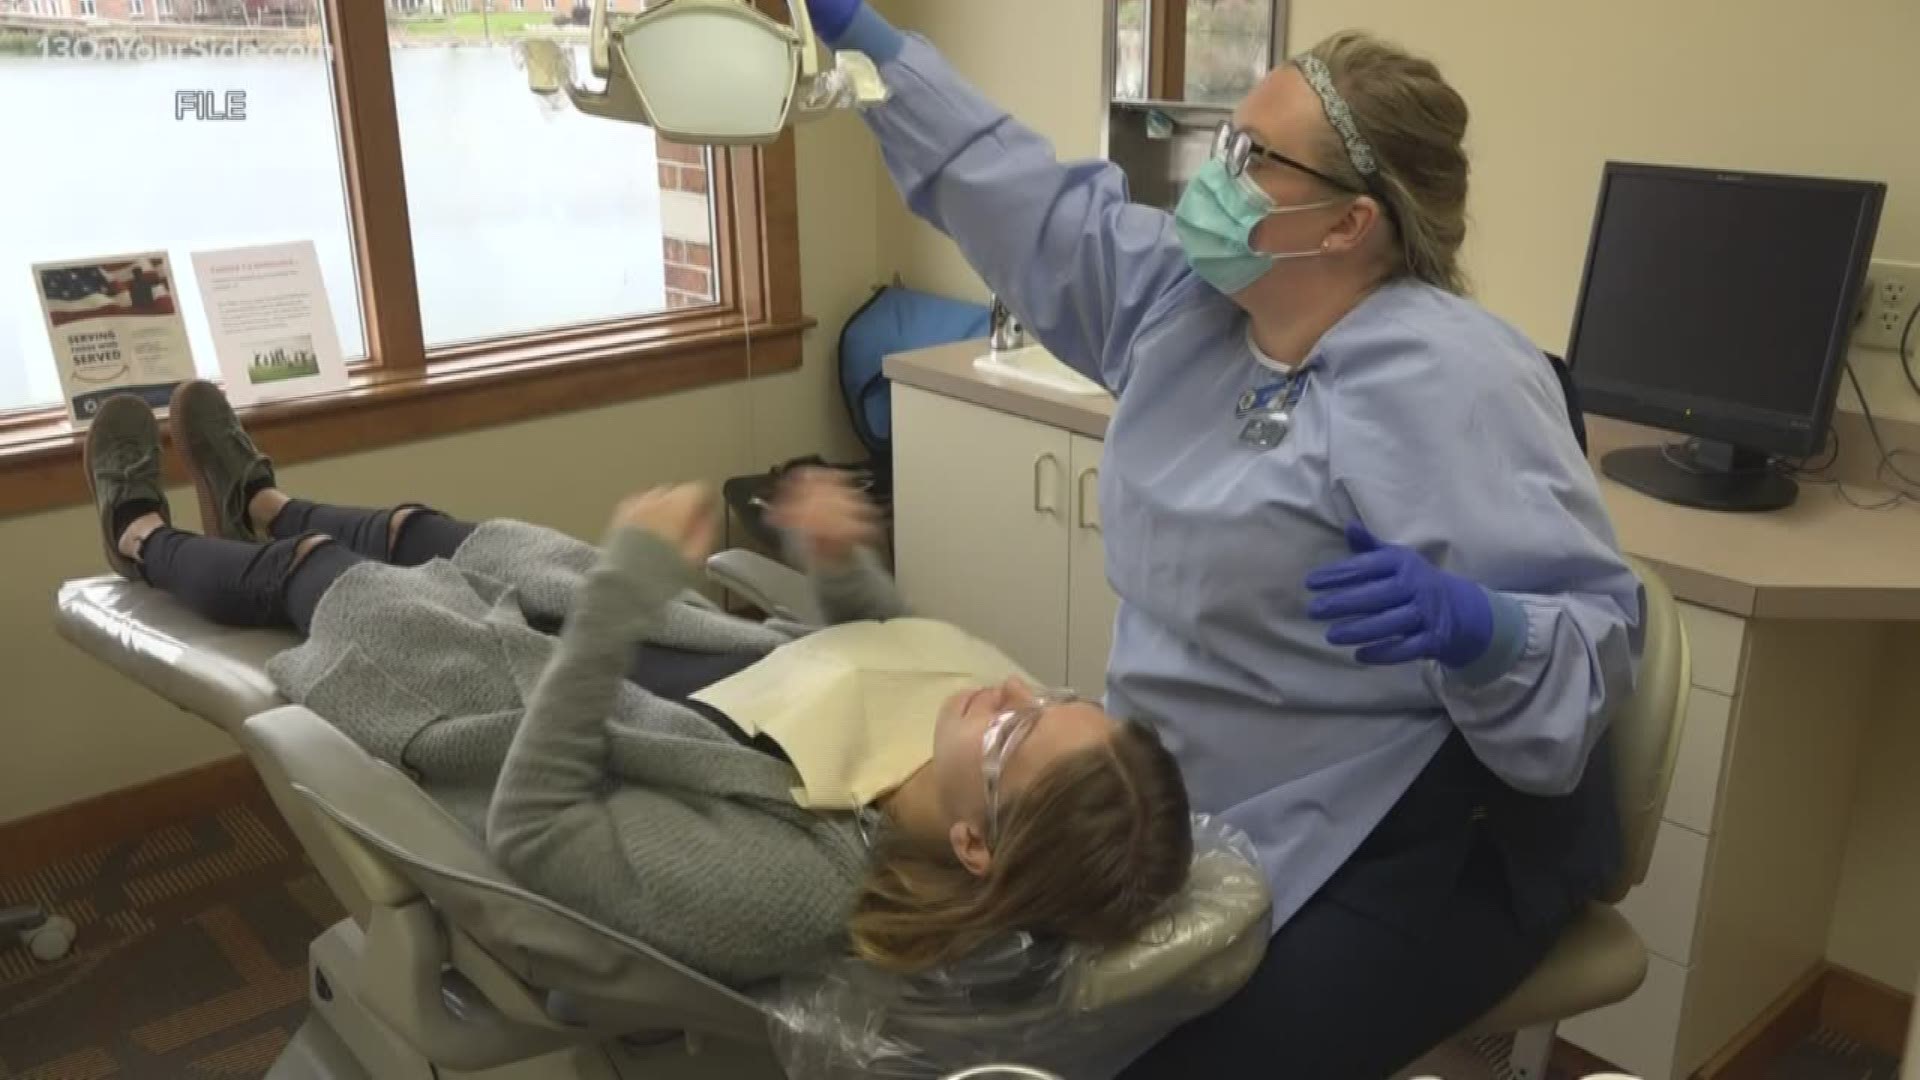 The Michigan Dental Association advising officers to close March 17.